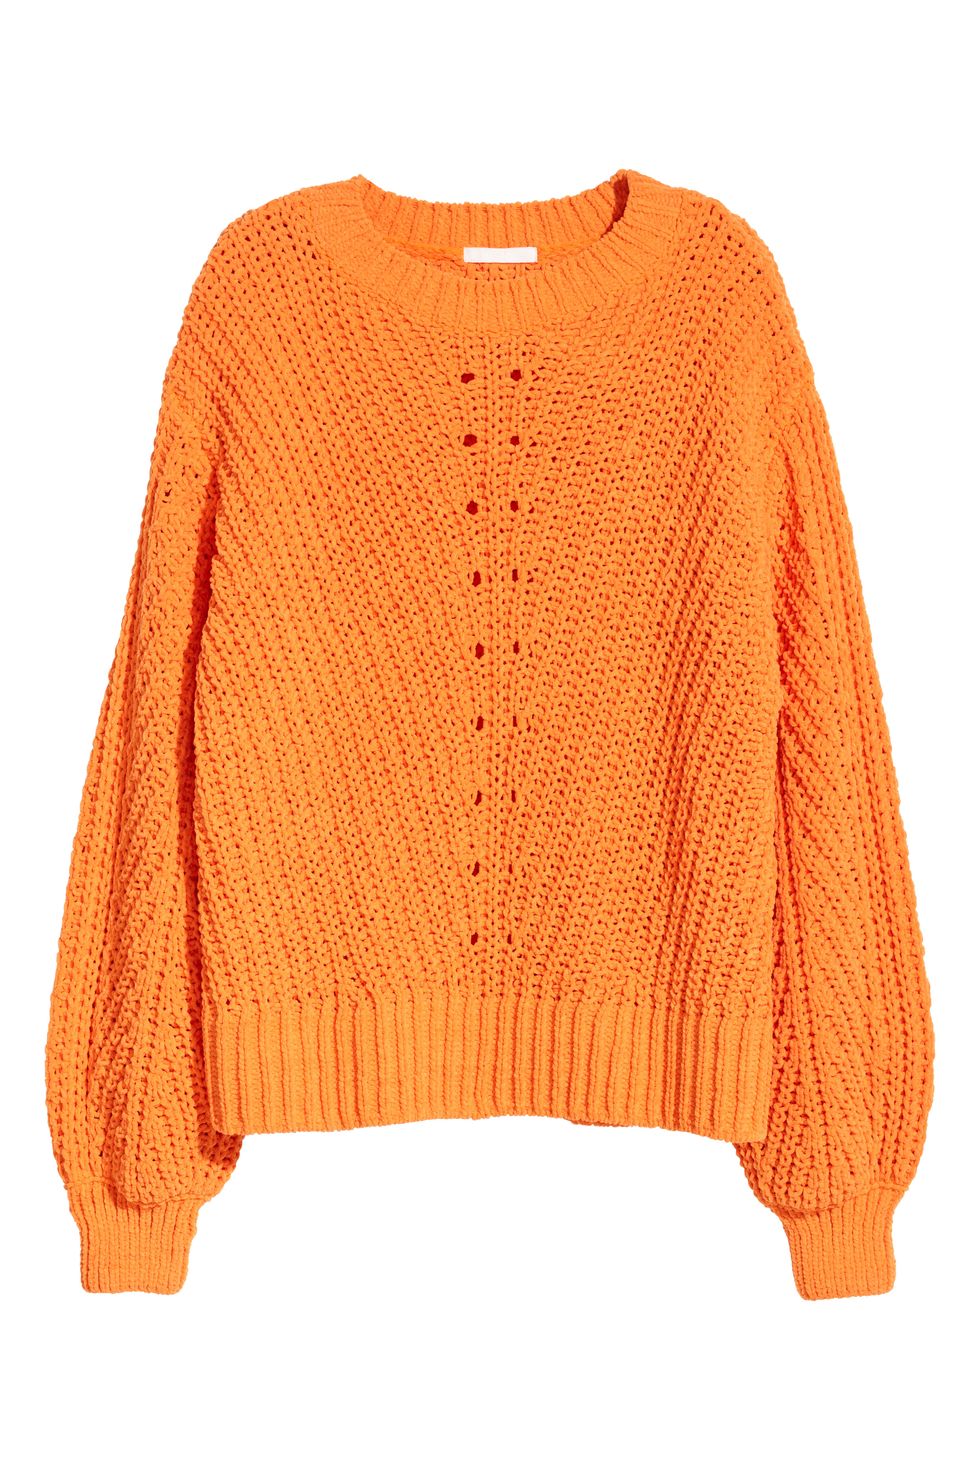 Clothing, Orange, Sleeve, Outerwear, Yellow, Sweater, Blouse, Neck, Peach, Top, 